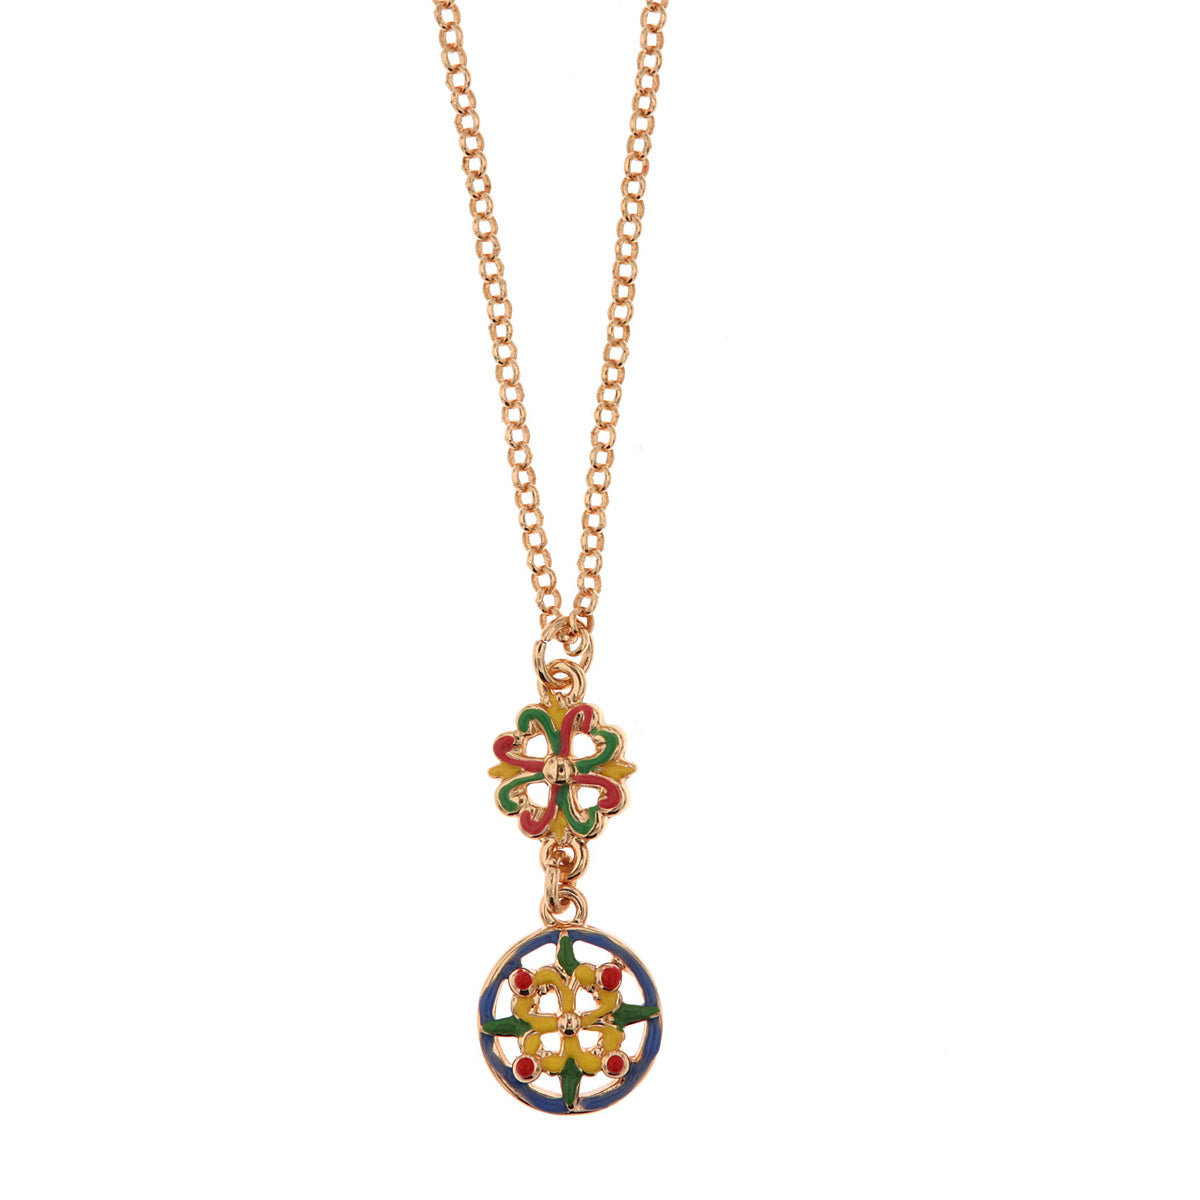 Metal necklace with maiolics from Caltagirone embellished with colored glazes